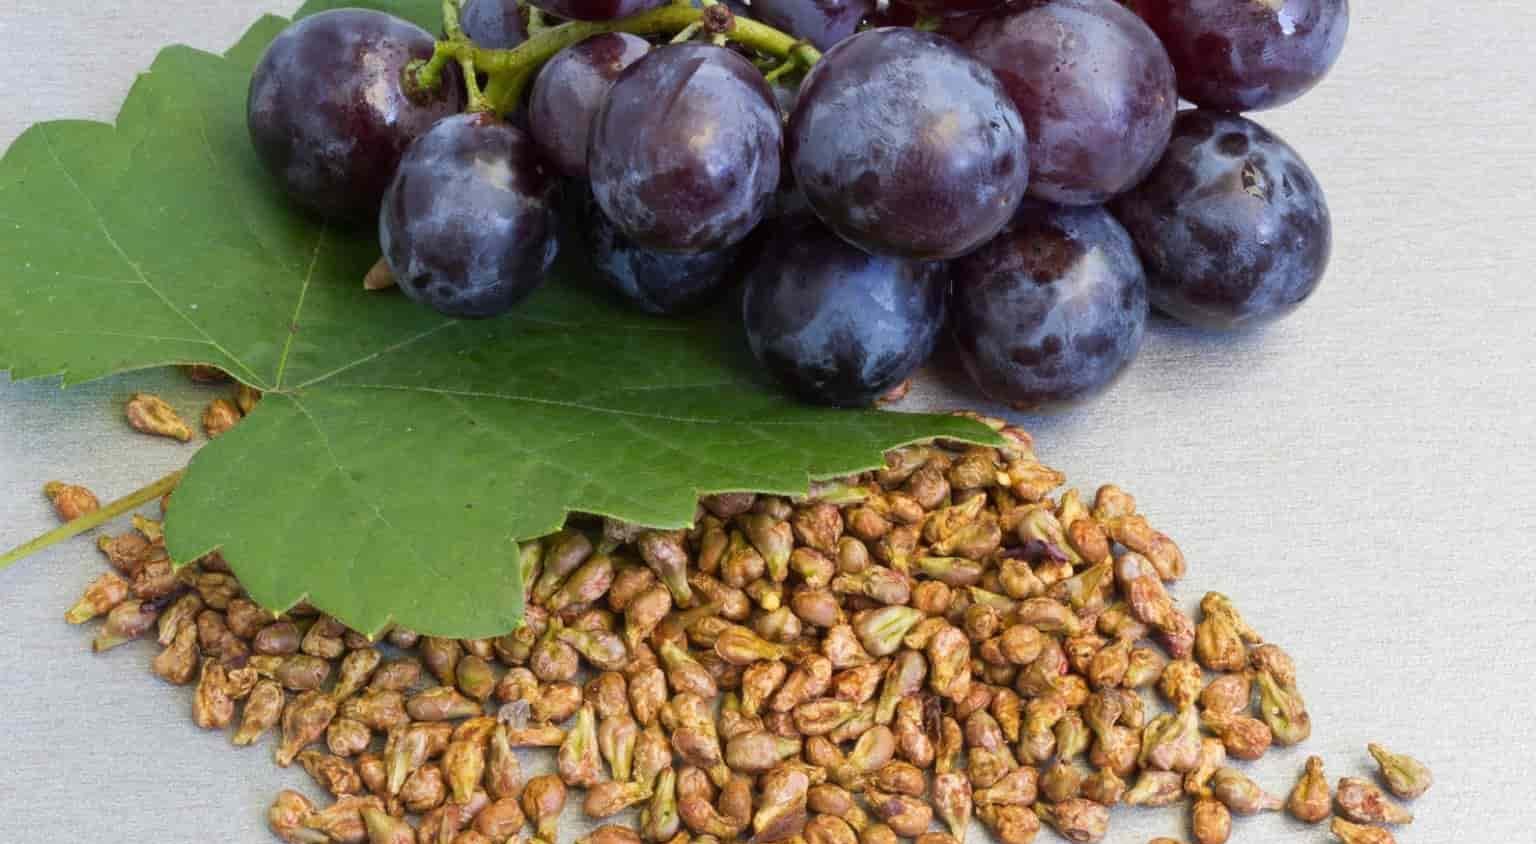 What is Grape Seed Extract